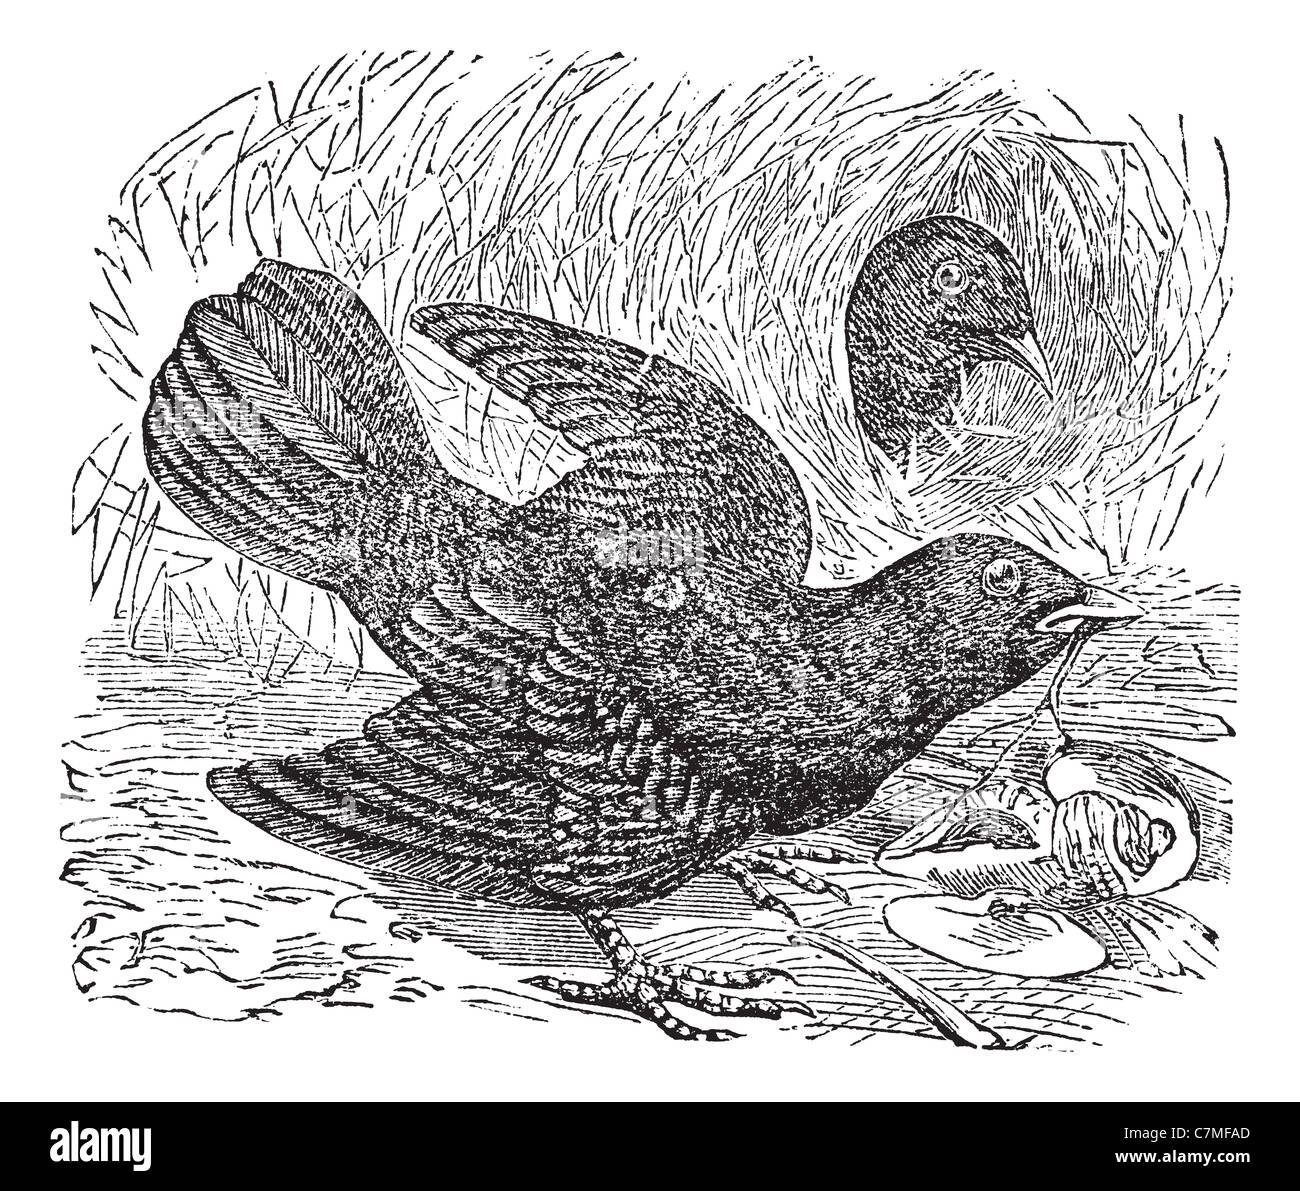 Satin Bowerbird or Ptilonorhynchus violaceus, vintage engraving. Old engraved illustration of two Satin Bowerbird in the meadow. Stock Photo